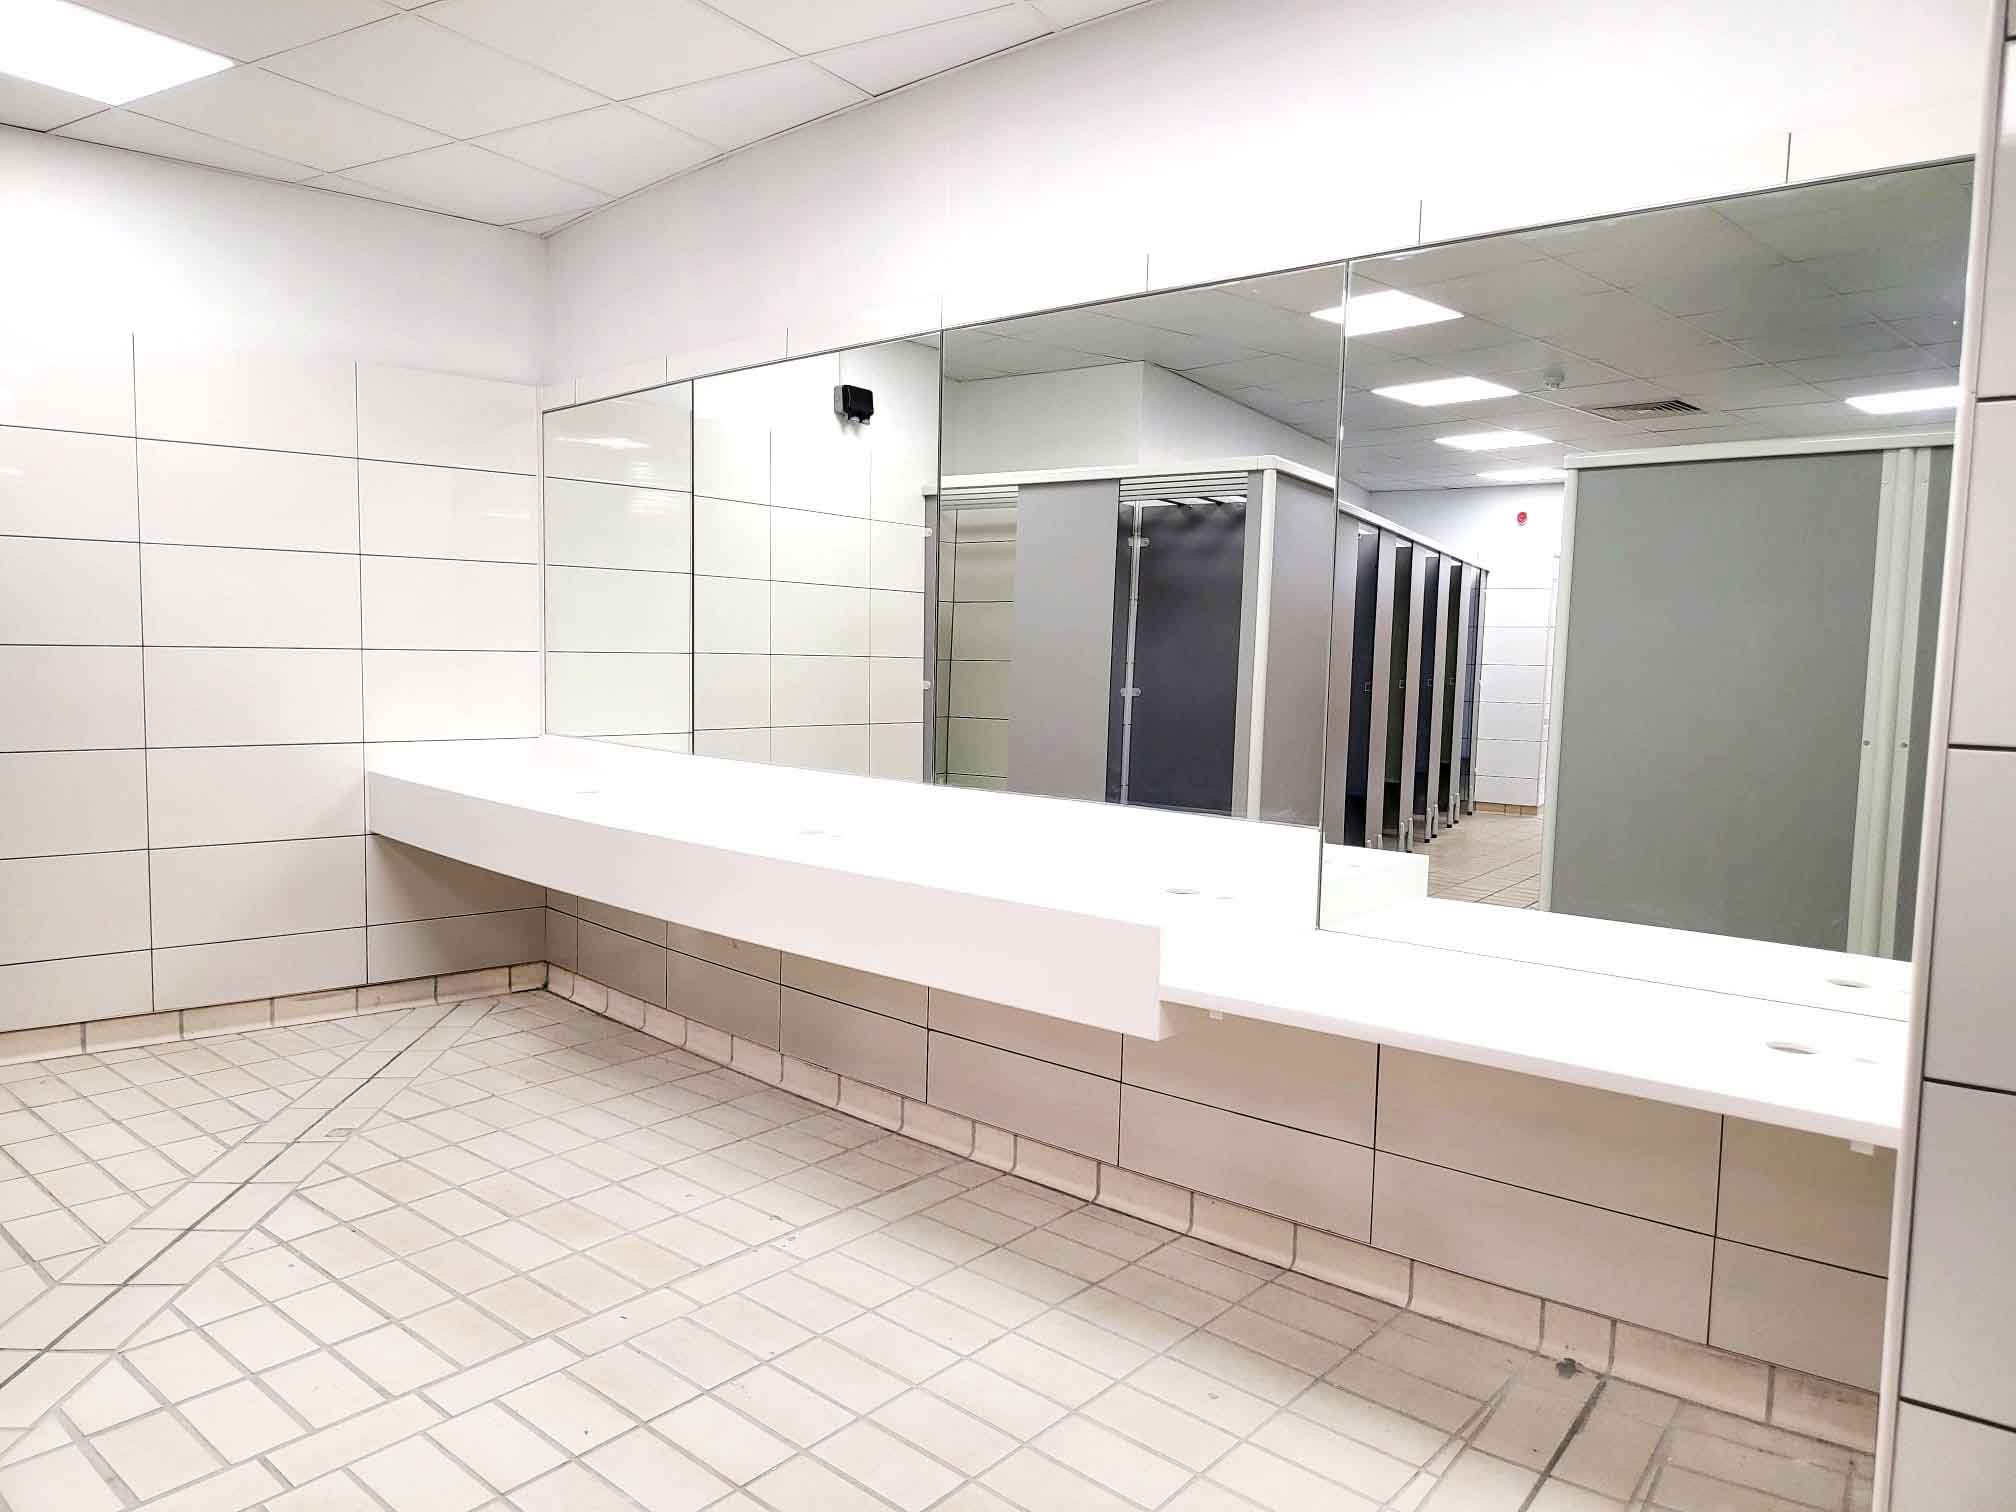 vanity area with mirrors above in changing room at herons leisure centre.jpg